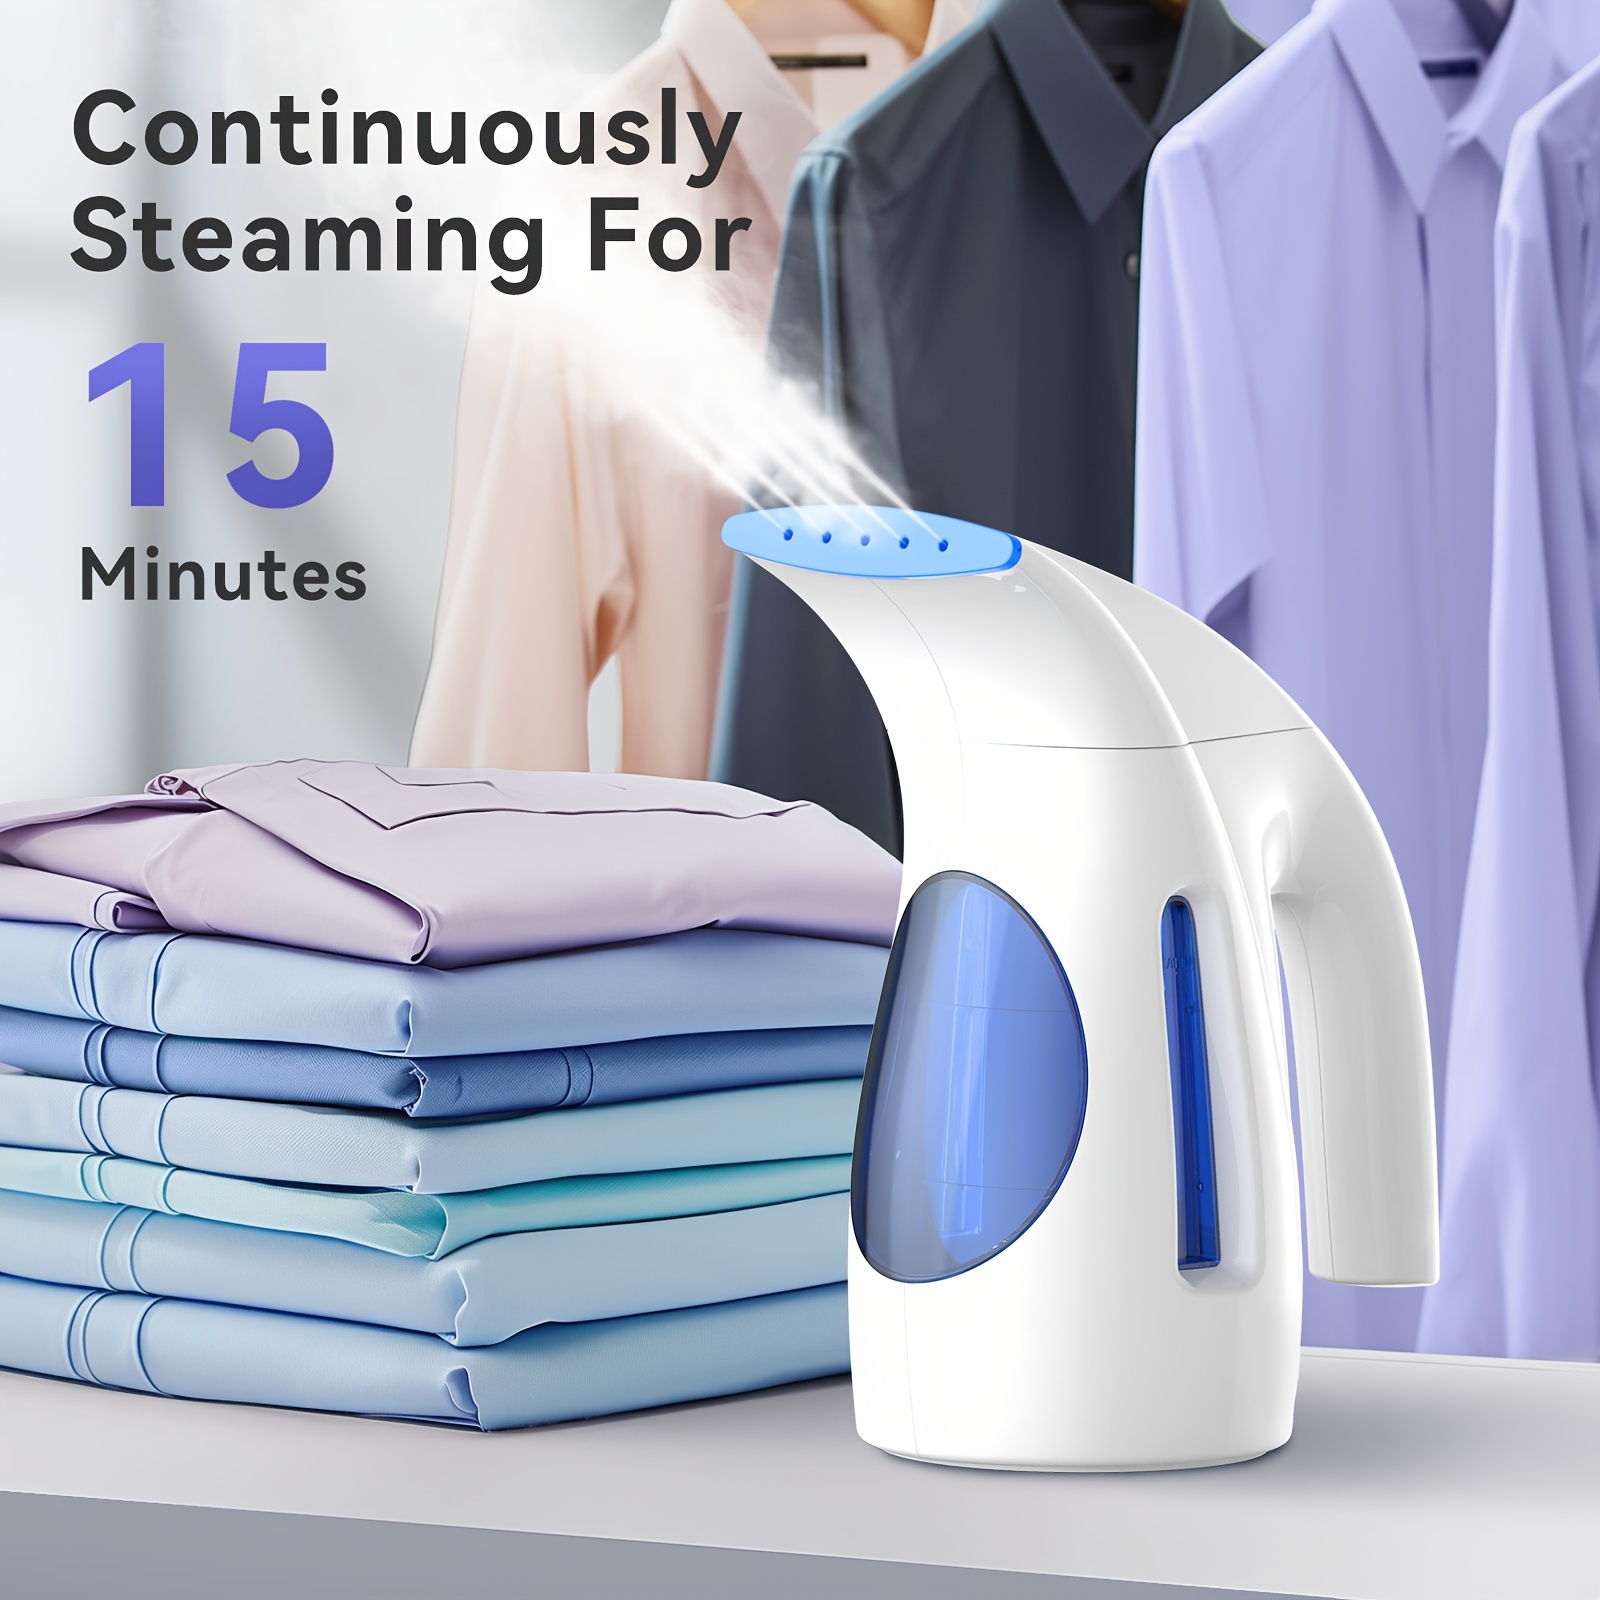 

240ml Hilife Portable Handheld Steamer For Clothes - Strong 700w Penetrating Steam, Removes Wrinkles, Easy To Use For Home, Office, Travel - Abs Material, 110-130v Us Plug, Power Supply